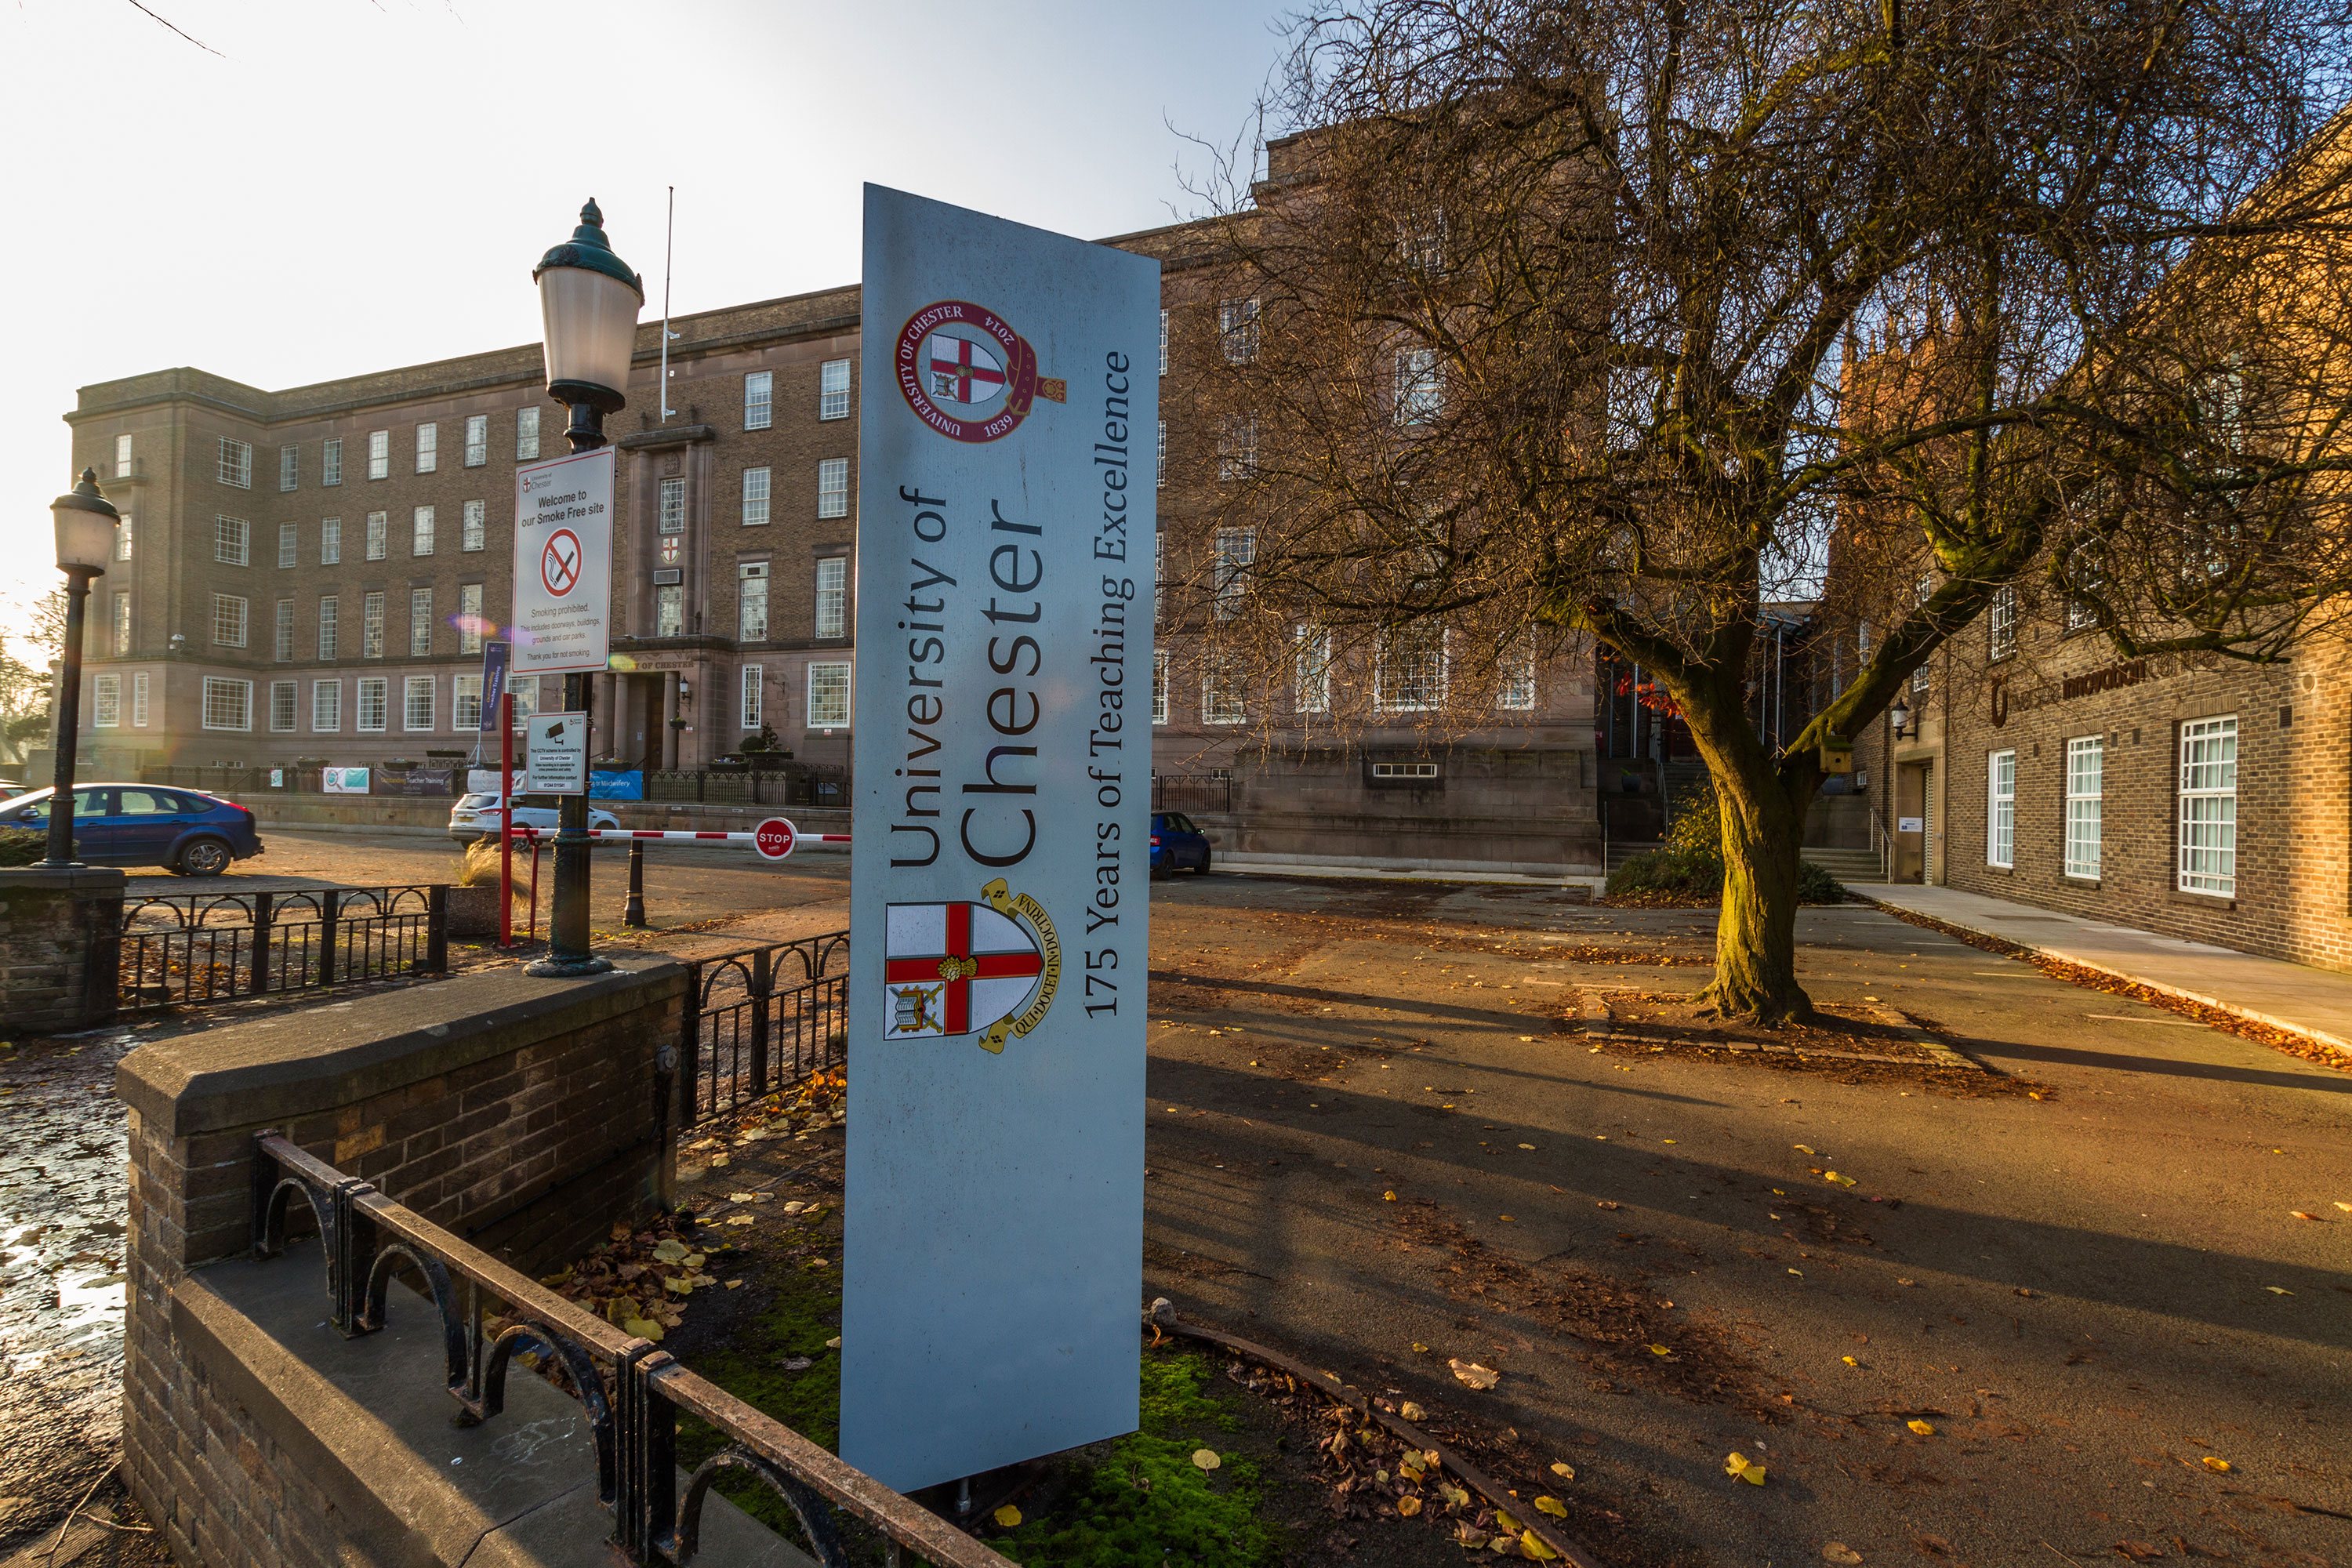 The University of Chester campus in November 2018.